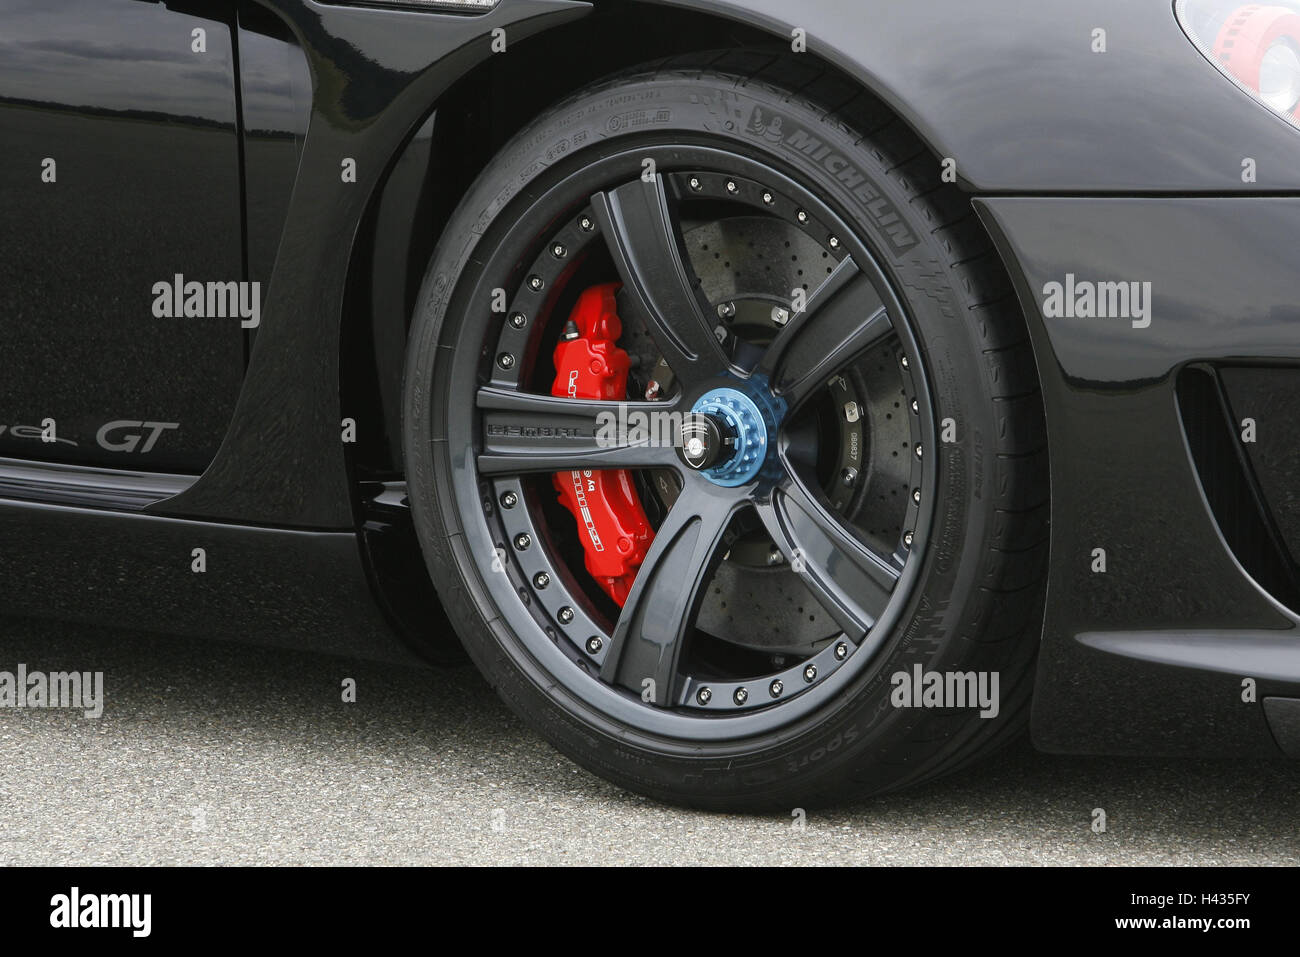 Porsche Gemballa Mirage GT, black, detail, wheel rim, car, outside, Gemballa, Gemballa mood, mood, luxury, luxury car, Porsche-Mirage-GT, Porsche, tyre, brake, front wheel, radian, sports car, nobly, exclusively, stand, medium close-up, Stock Photo